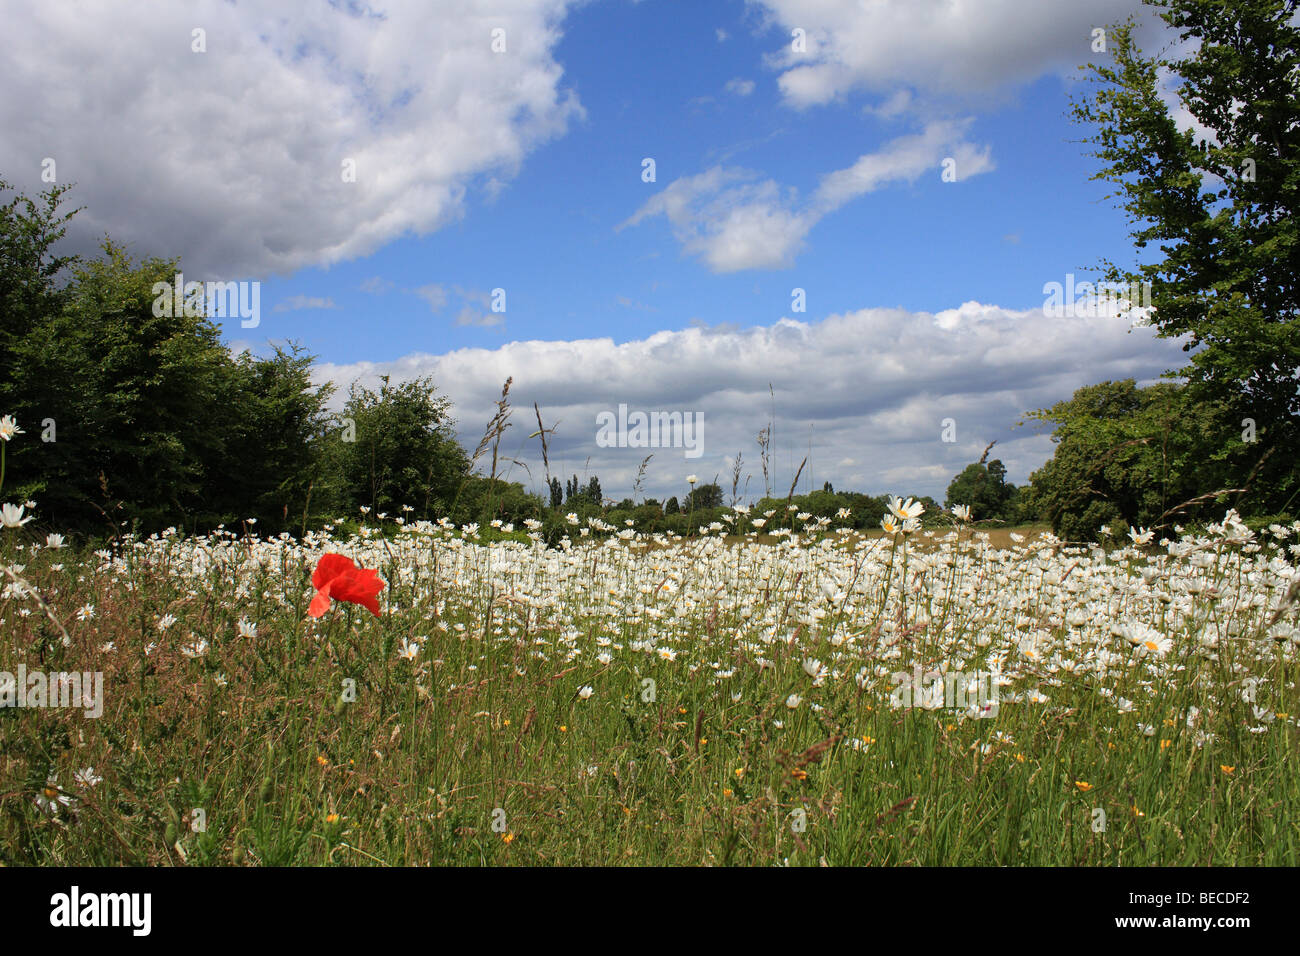 A single poppy in a field of Ox-eye daisies, Surrey, England, UK. Stock Photo